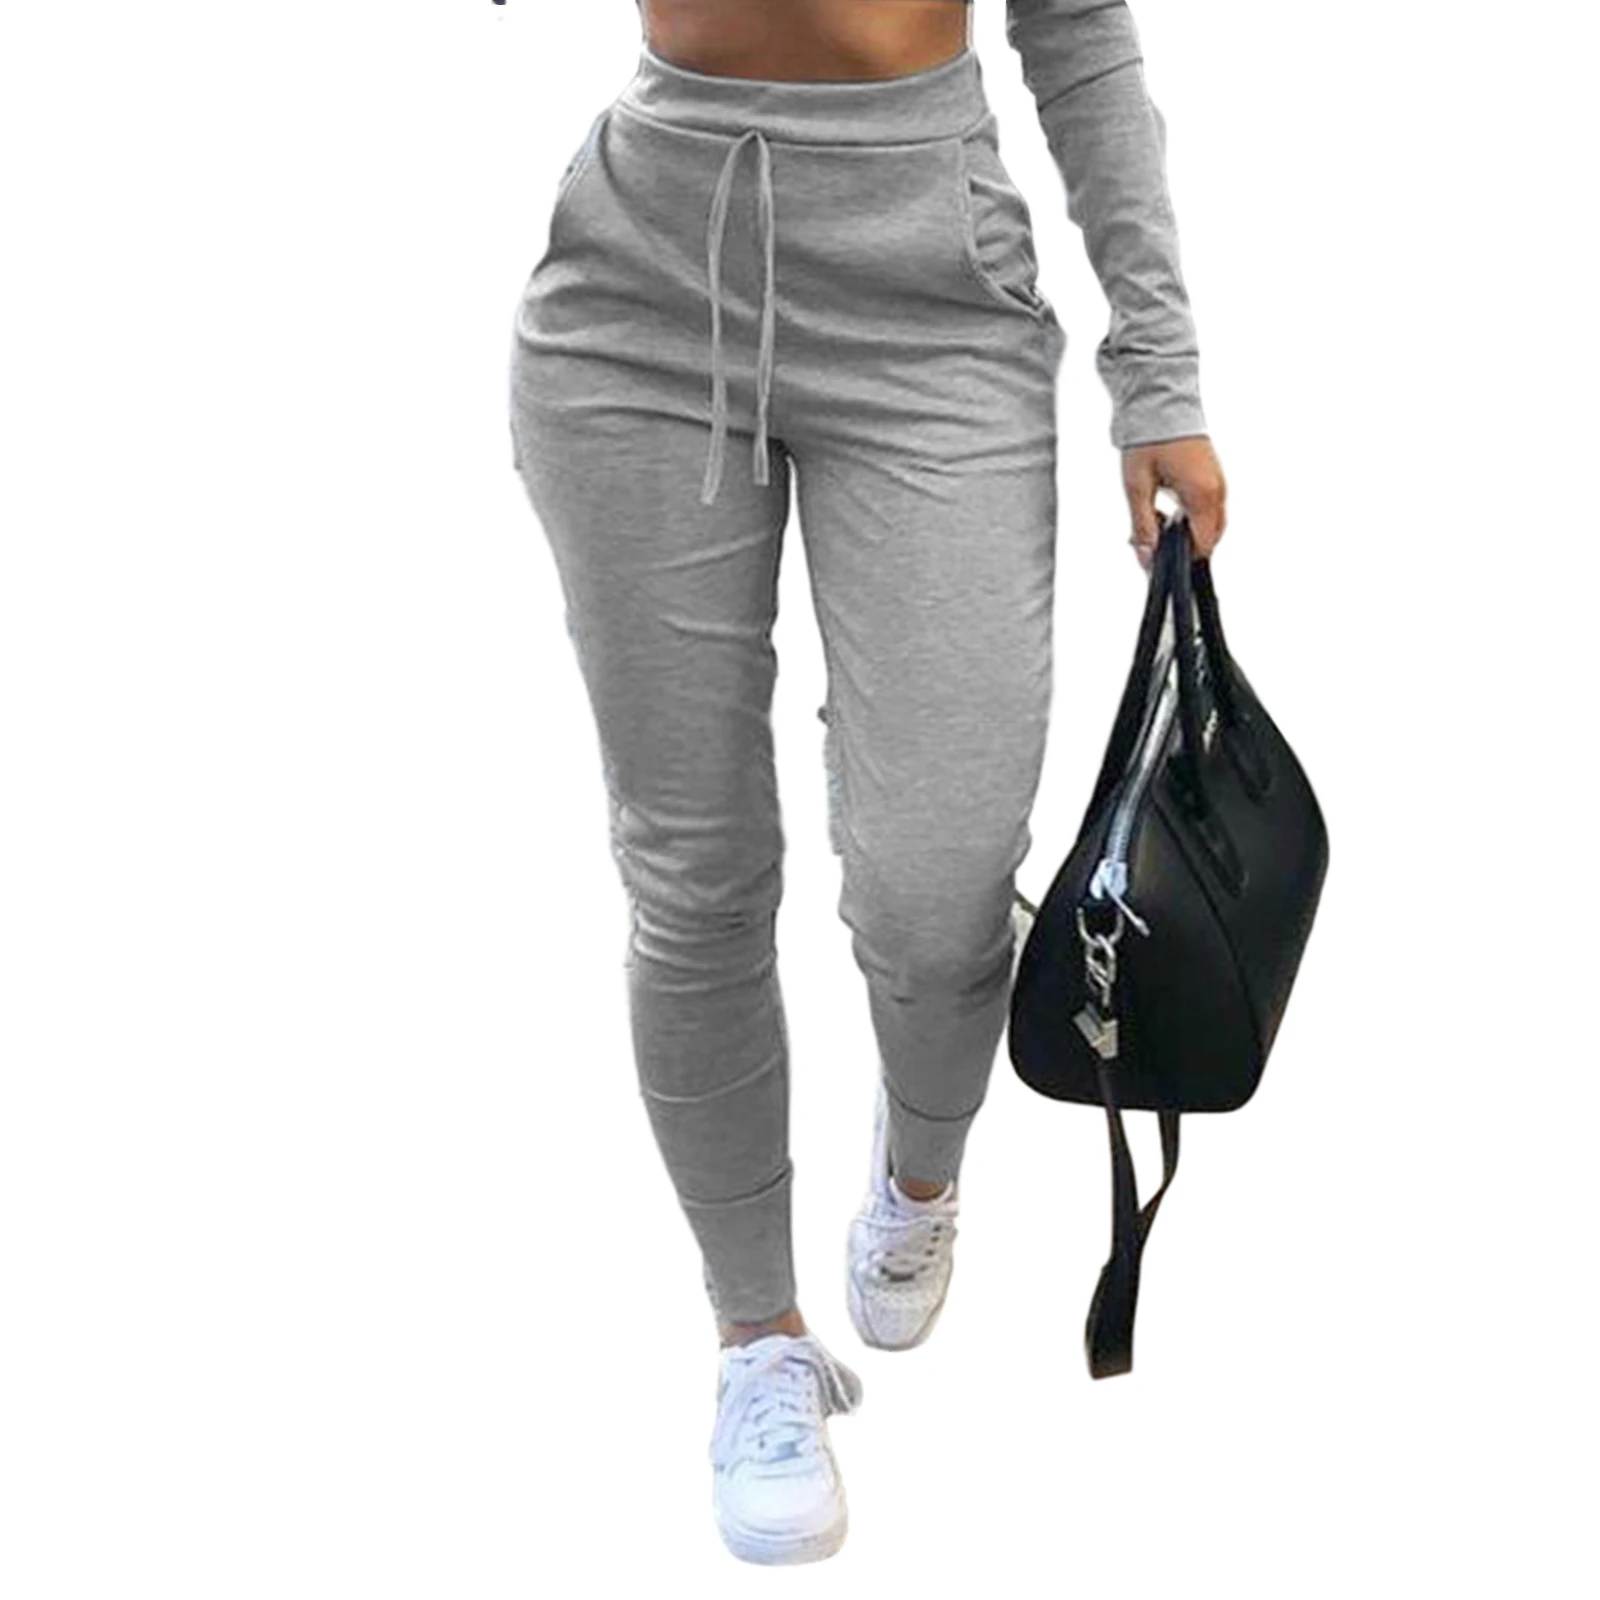 Women Jogger Pants Casual Solid Color Sport Pants, Elastic Waist Ankle Cuff  Tight Sweatpants with Pocket